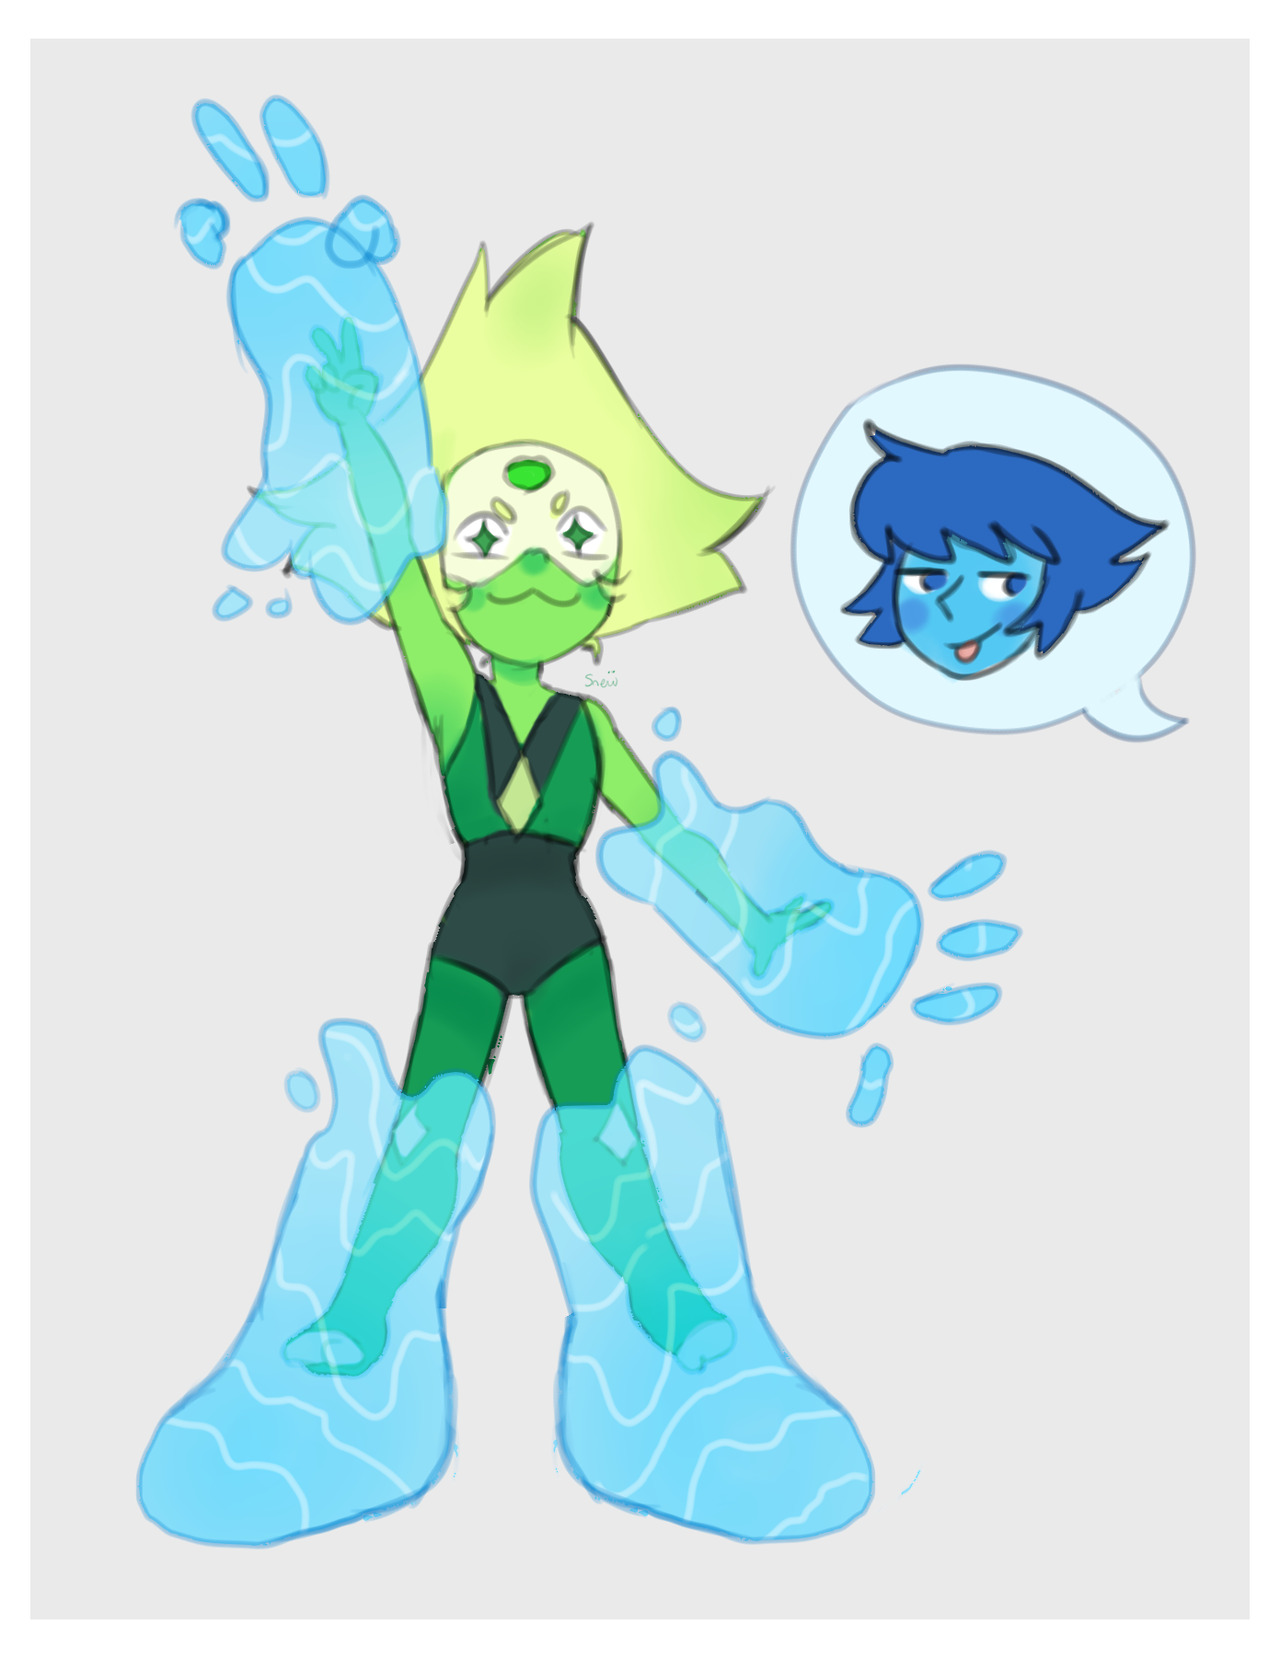 peridot missed her limb enhances, so lapis made her a little gift ԅ(≖‿≖)